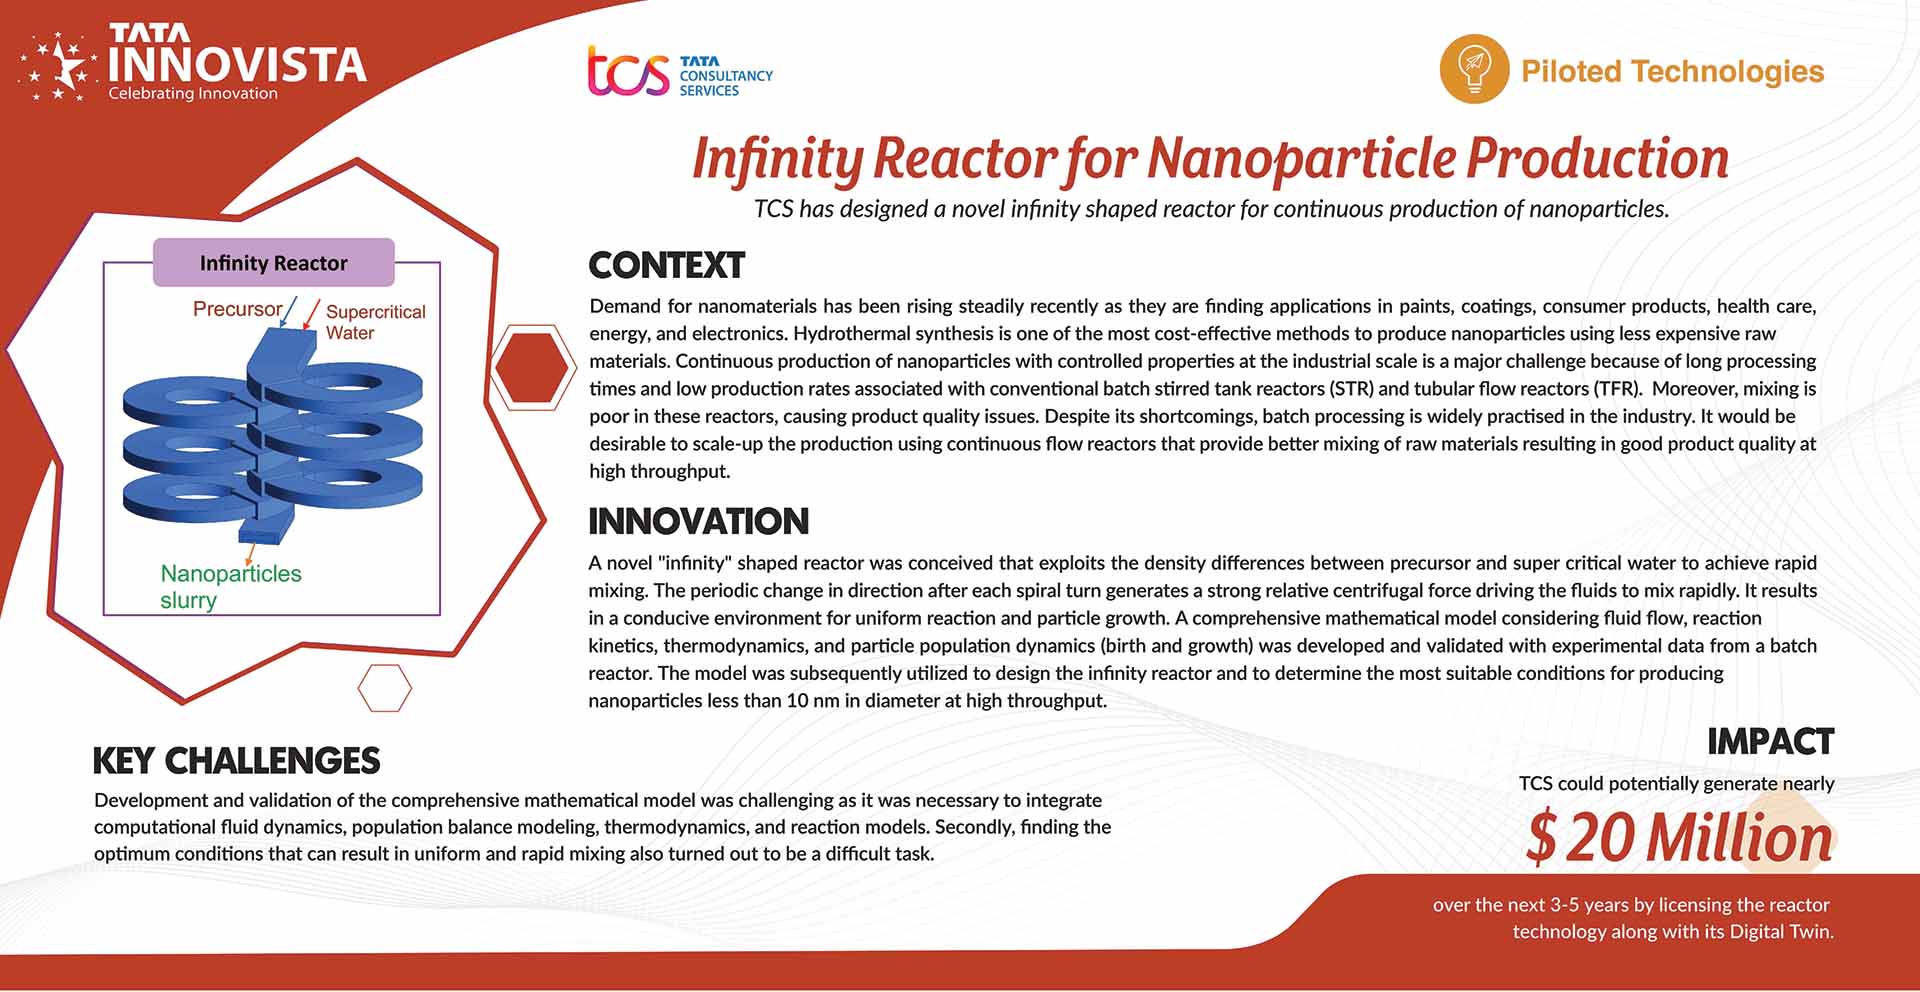 Infinity Reactor for Nanoparticle Production